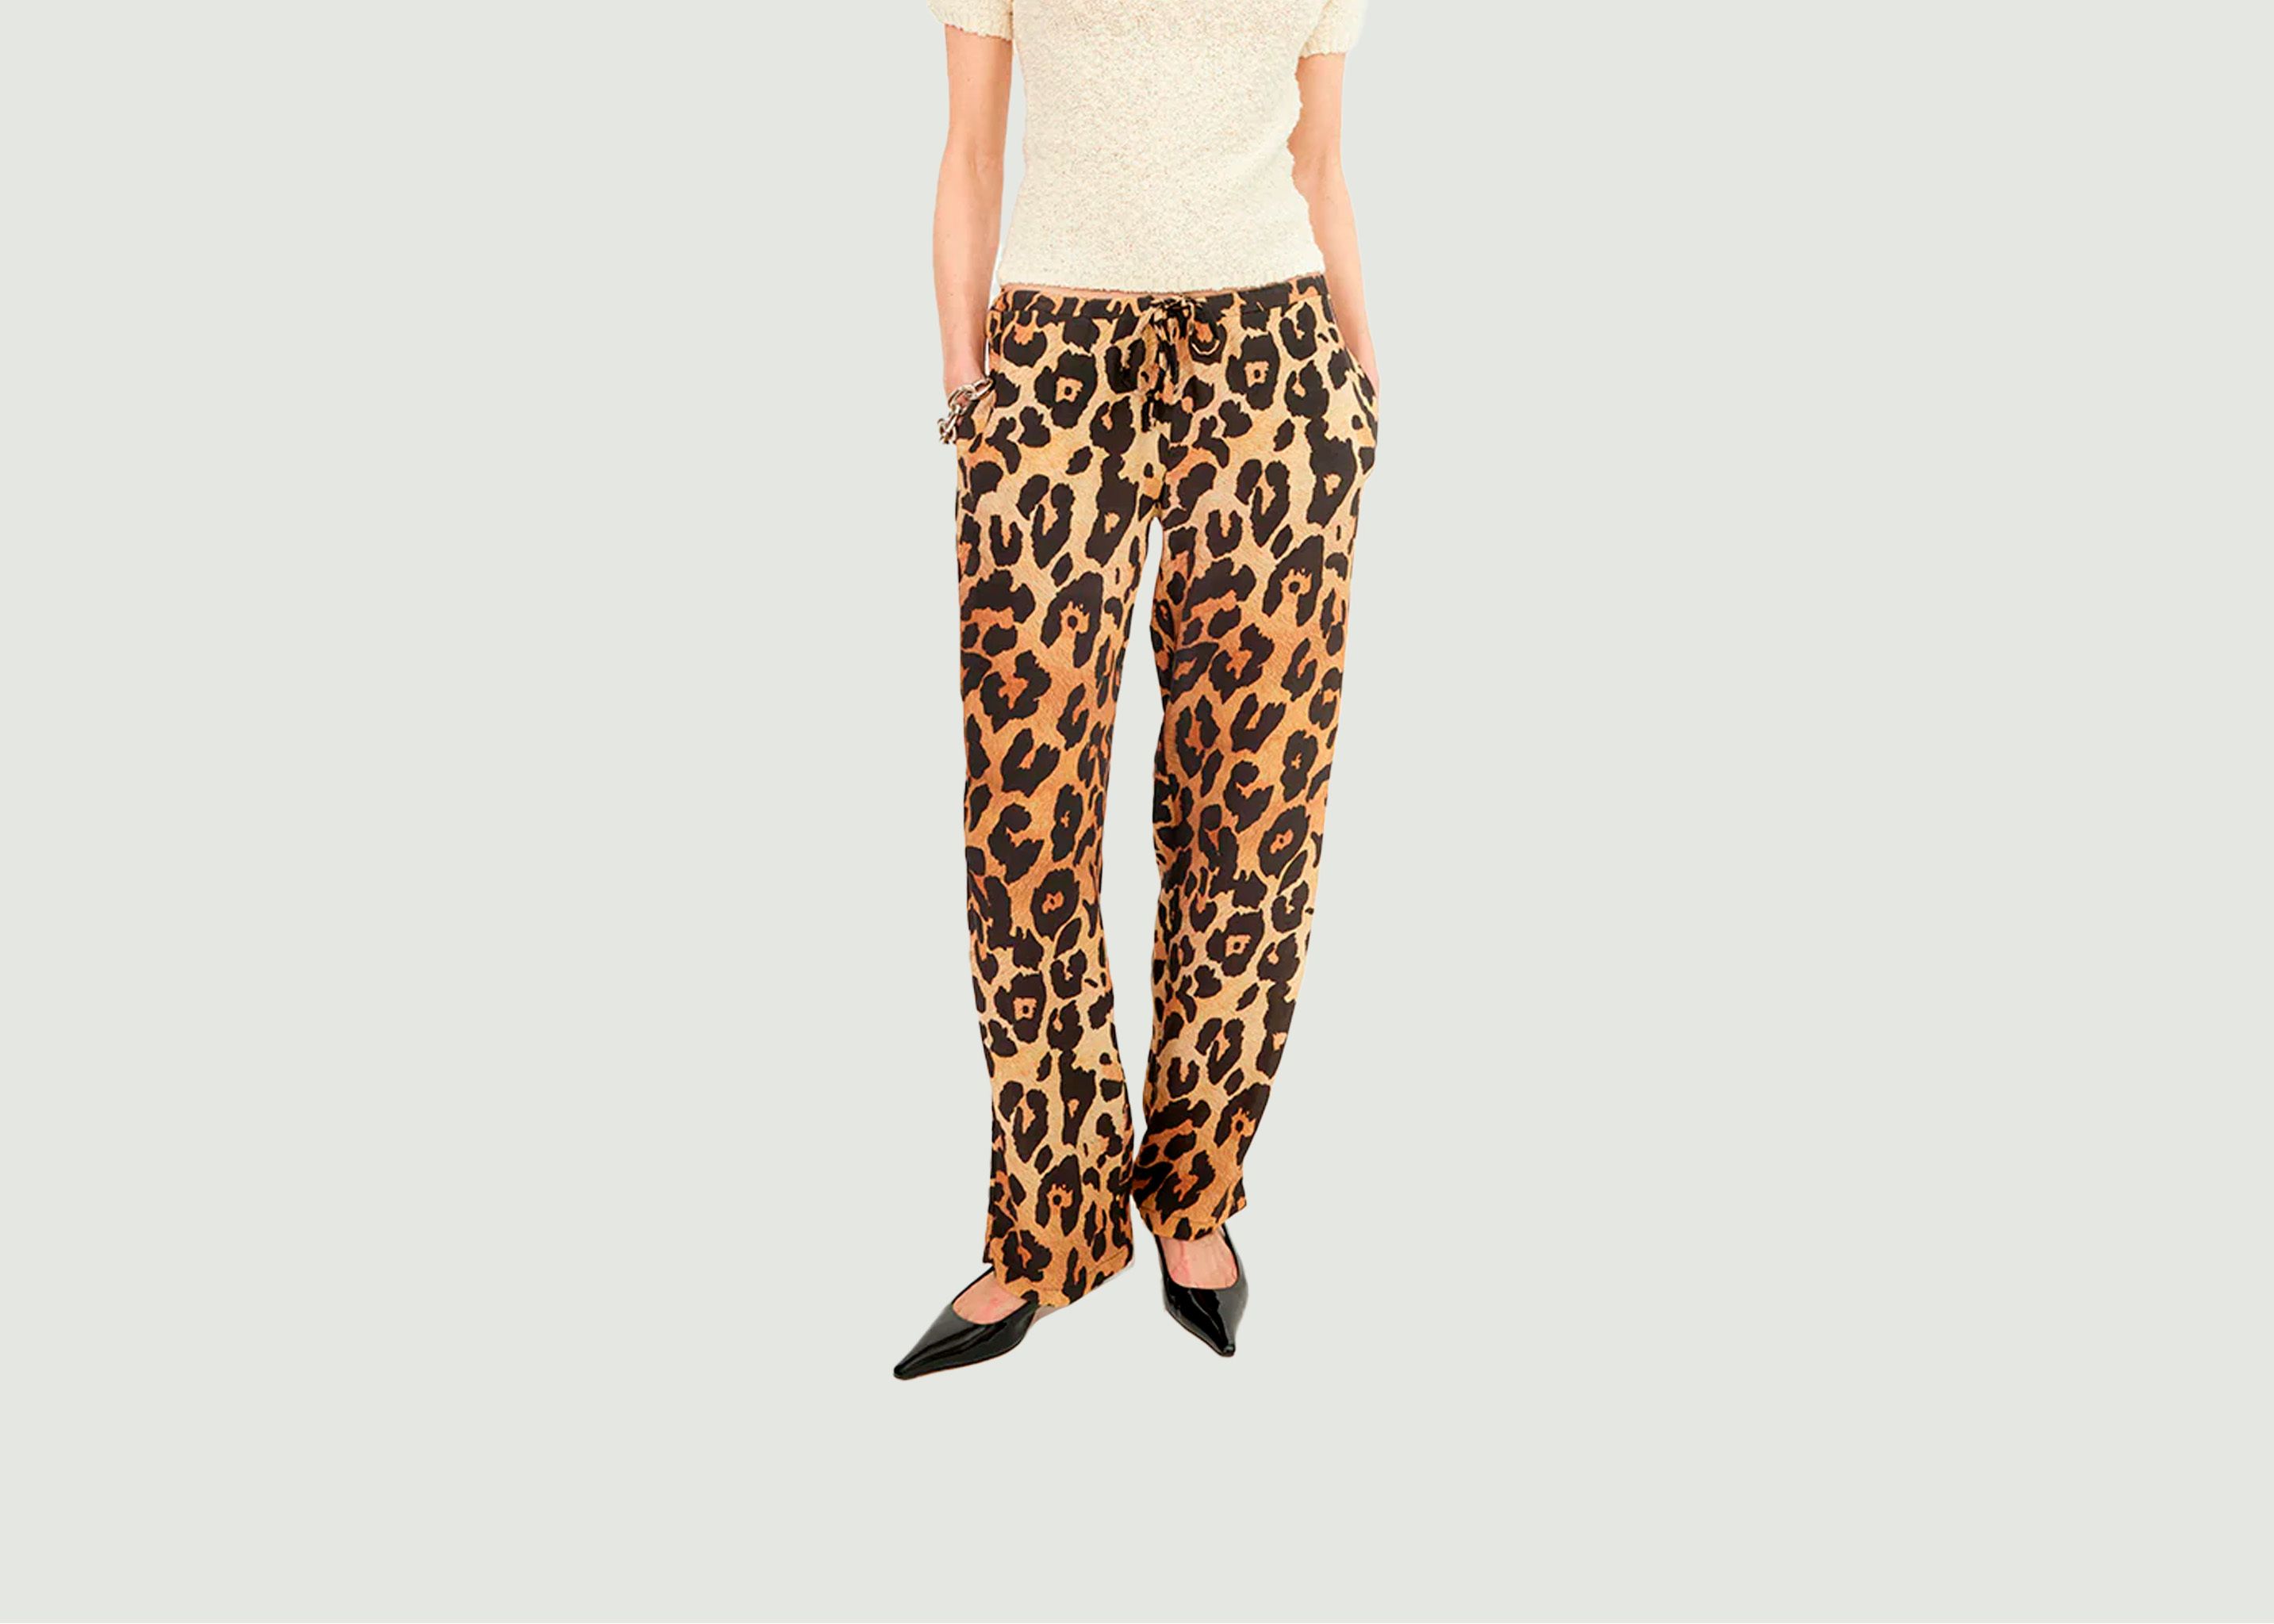 Wild print trousers - Musier